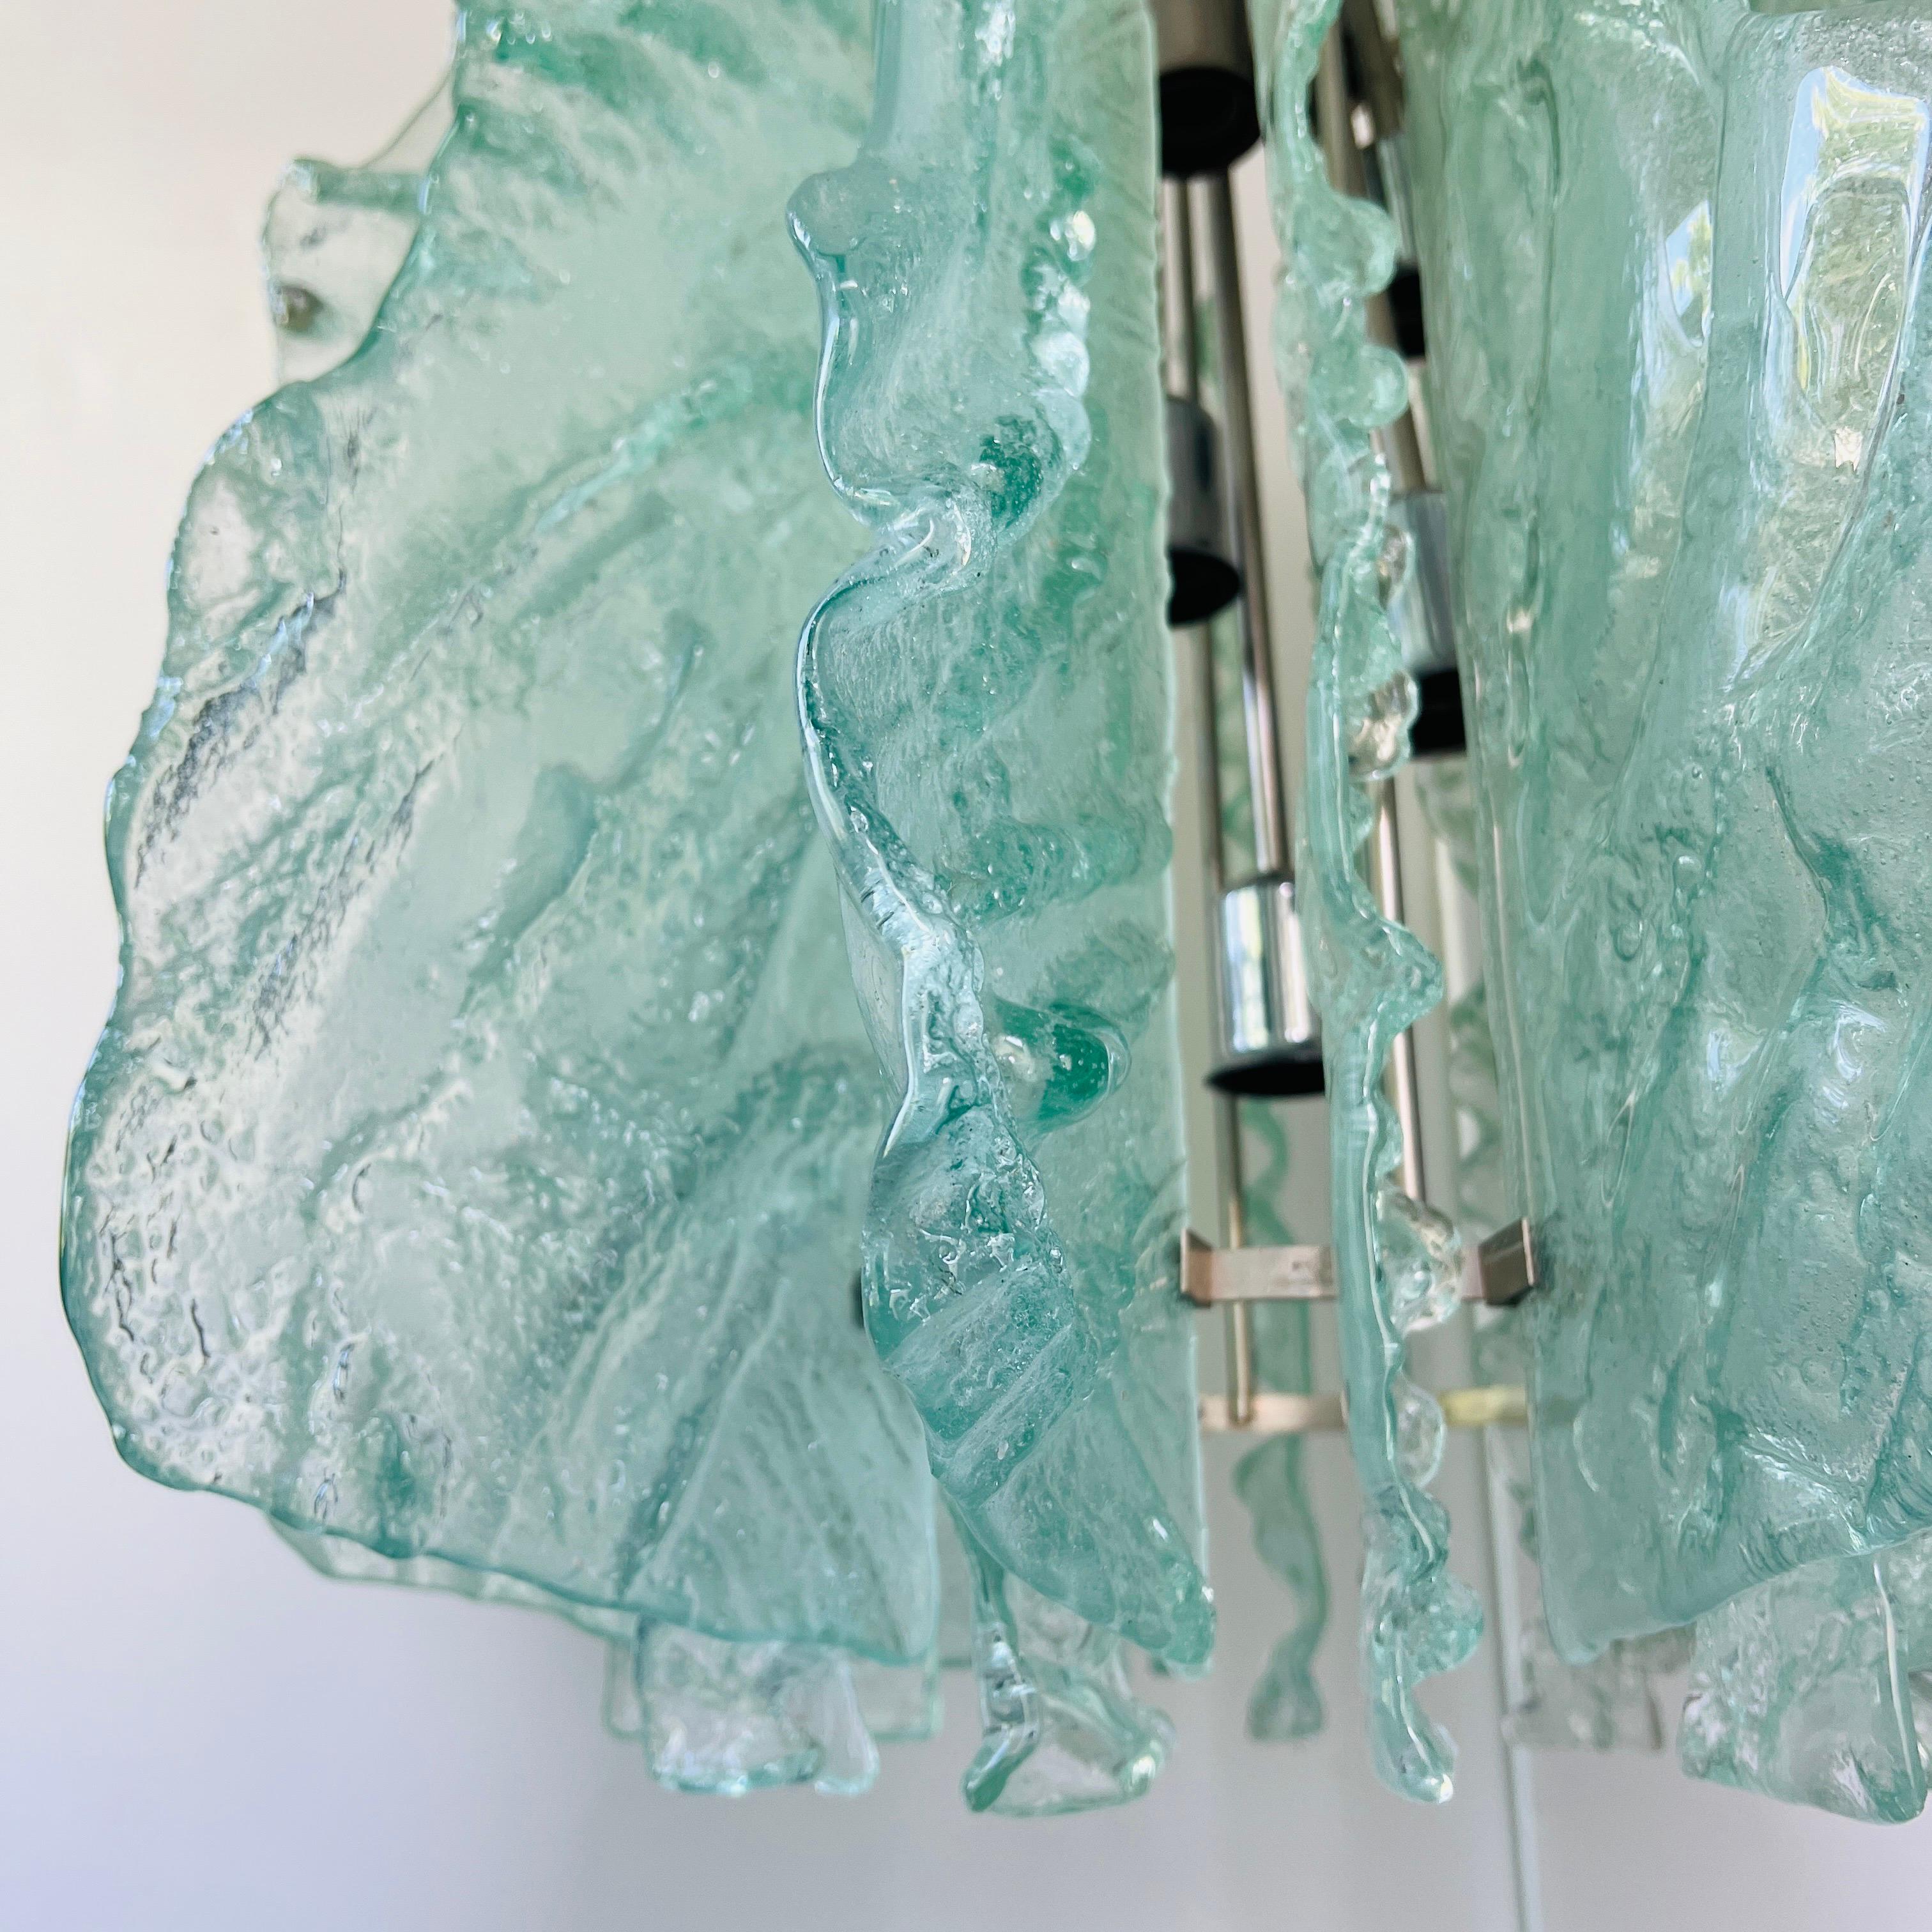 Mid-Century Modern Murano Glass Leaf Chandelier in Light Aqua, Israel c. 1970's In Good Condition For Sale In Fort Lauderdale, FL